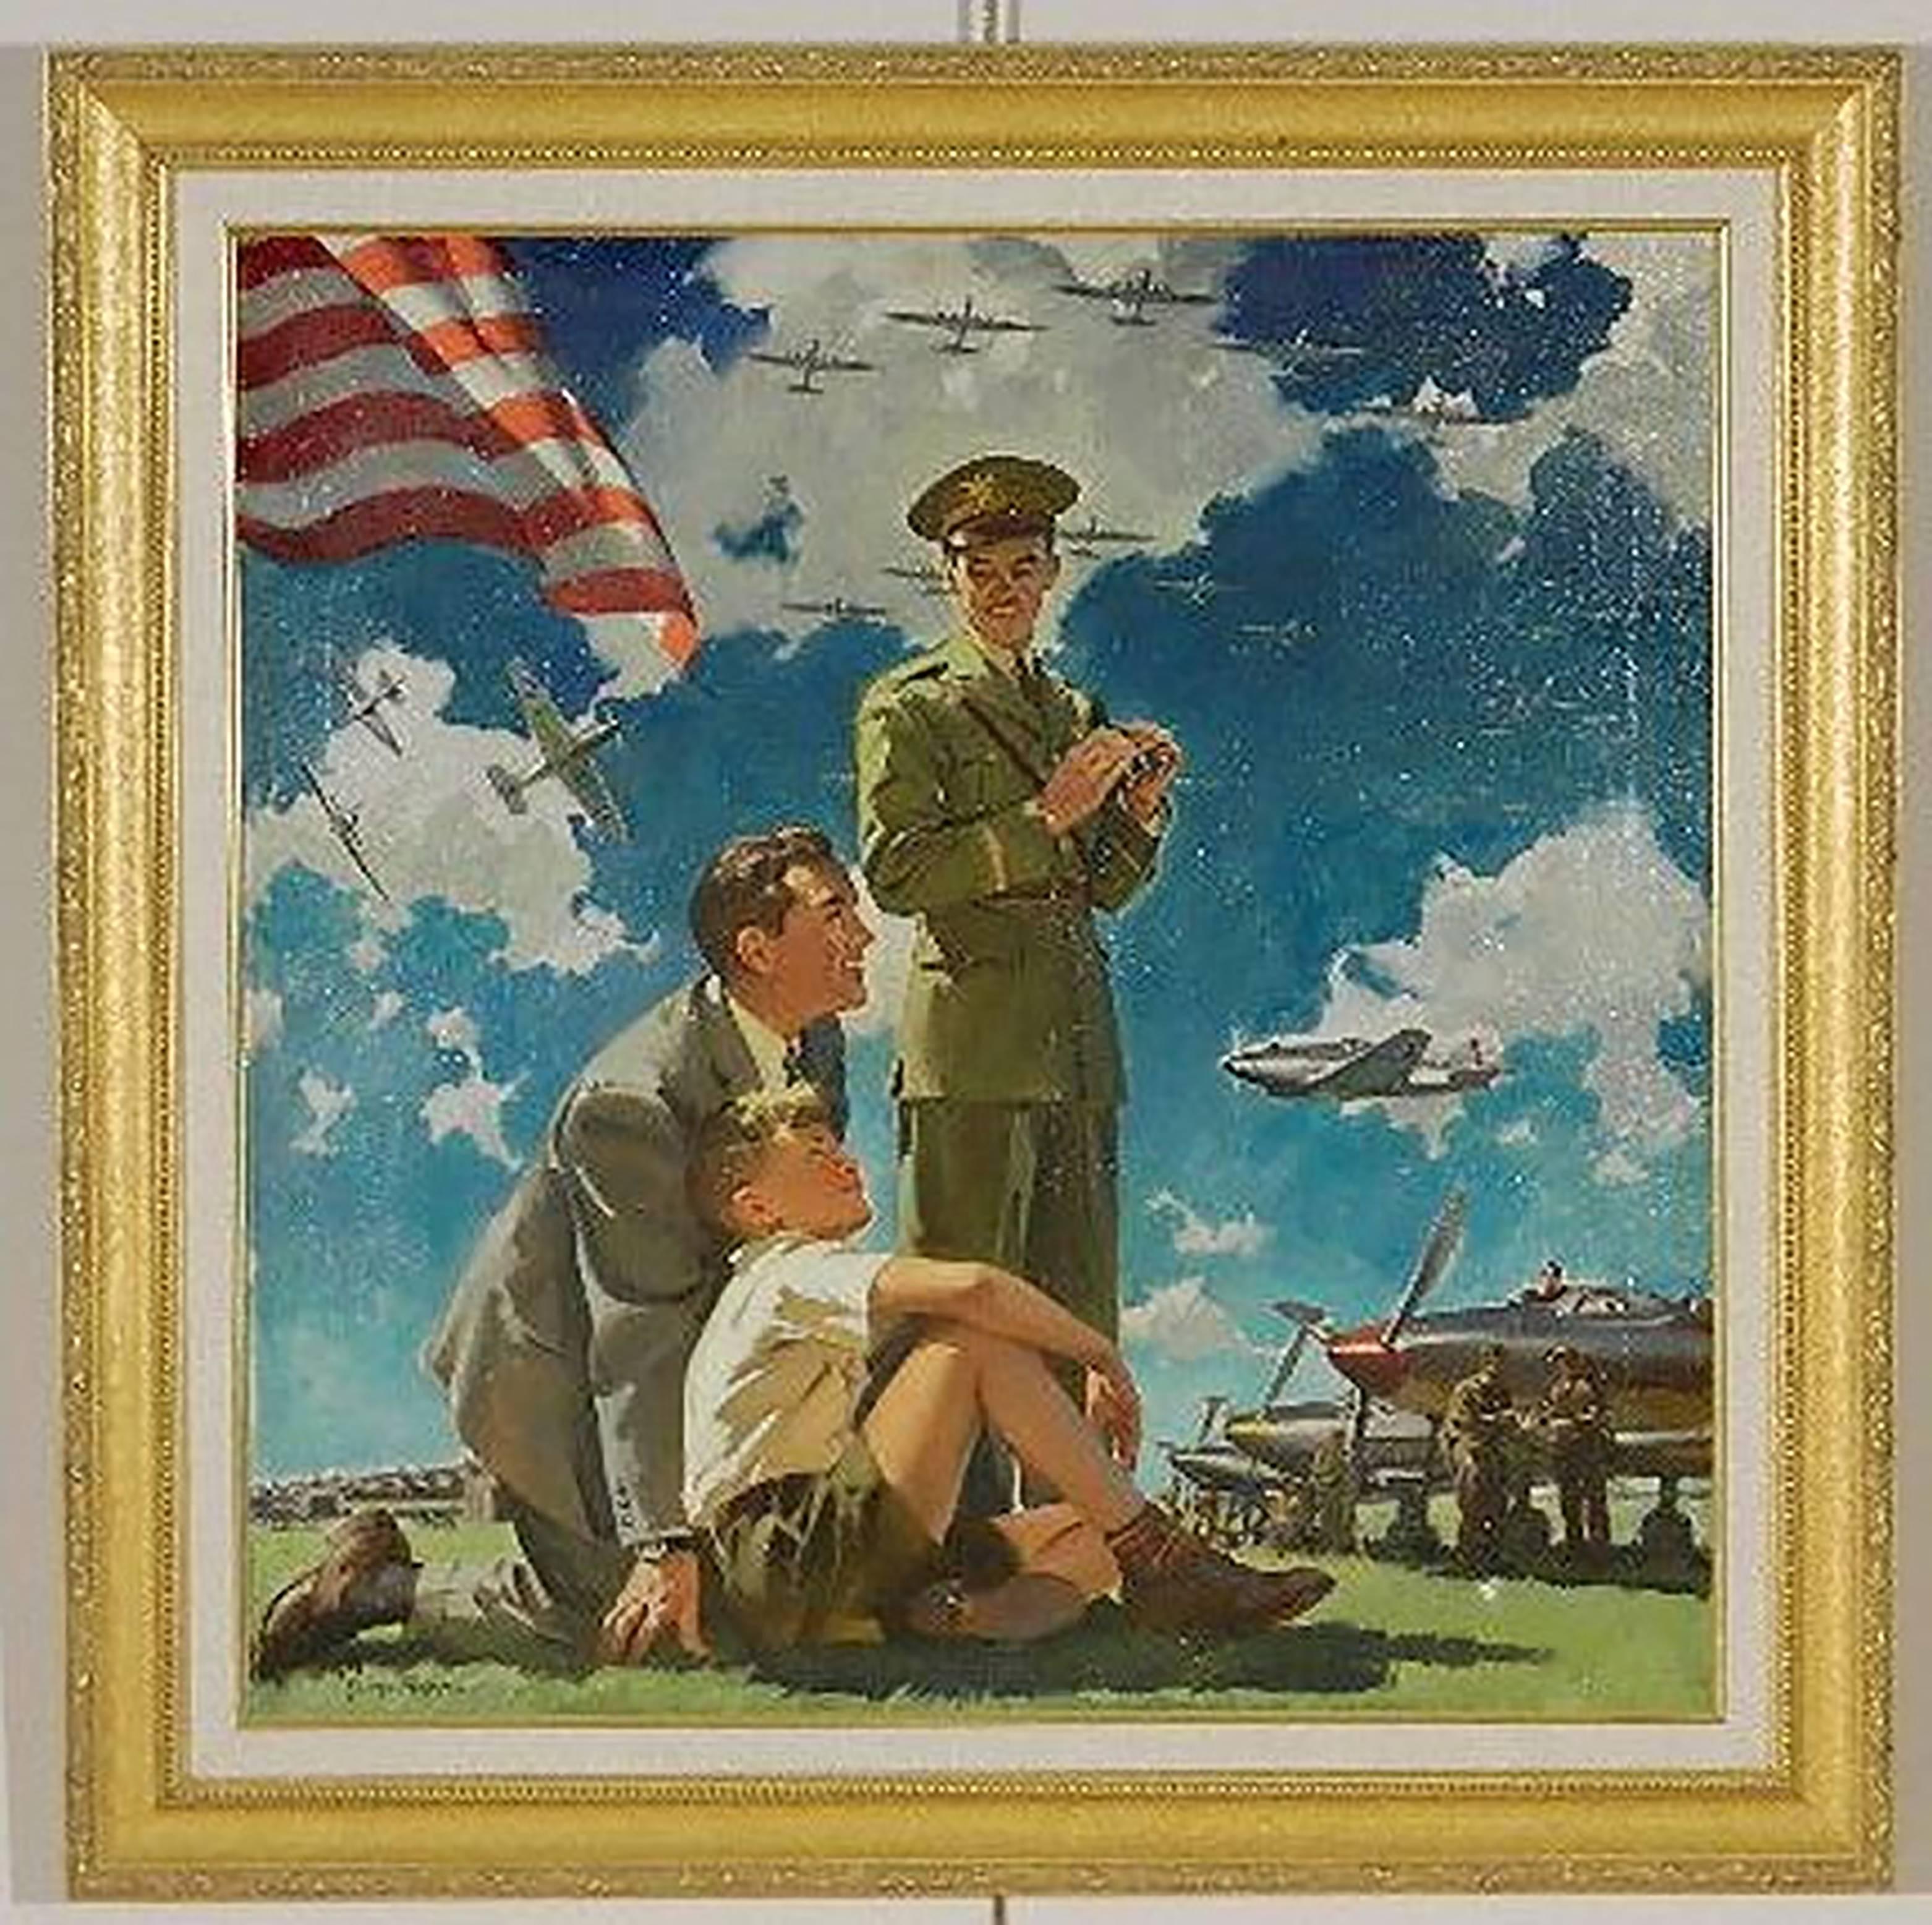 The Air Show - Painting by George L. Rapp